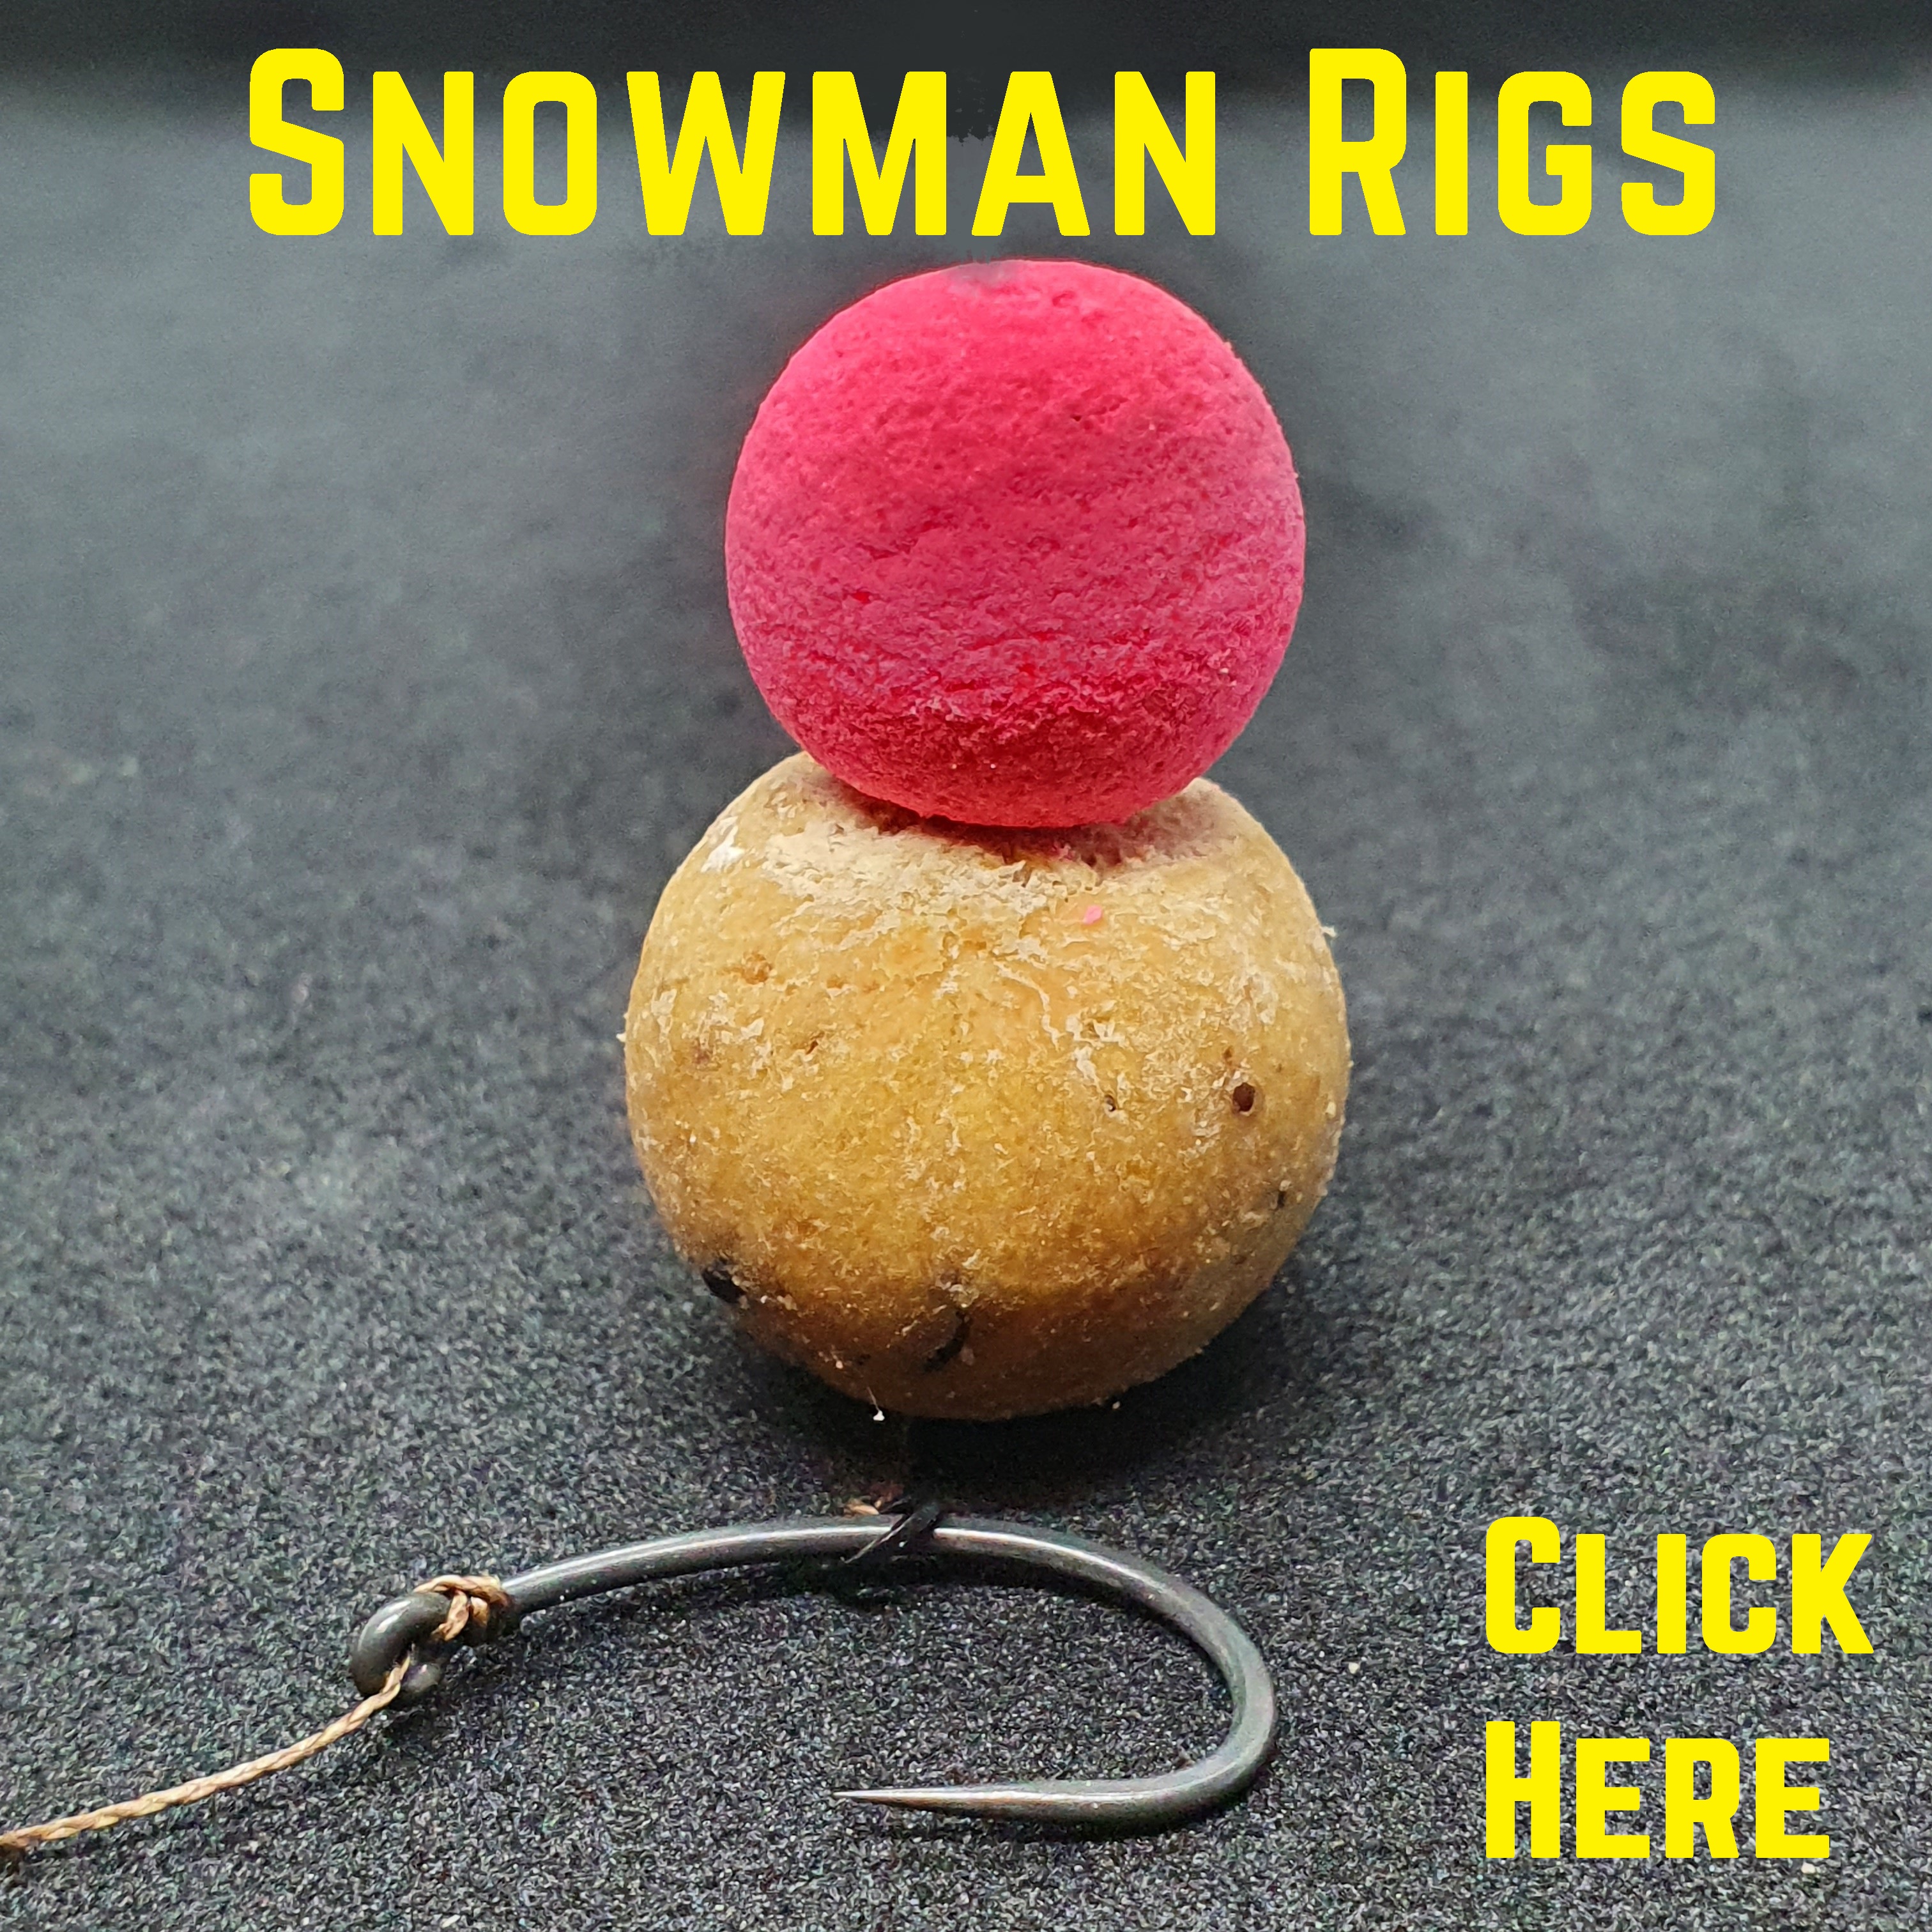 Please take a look at our other Snowman Rig listings